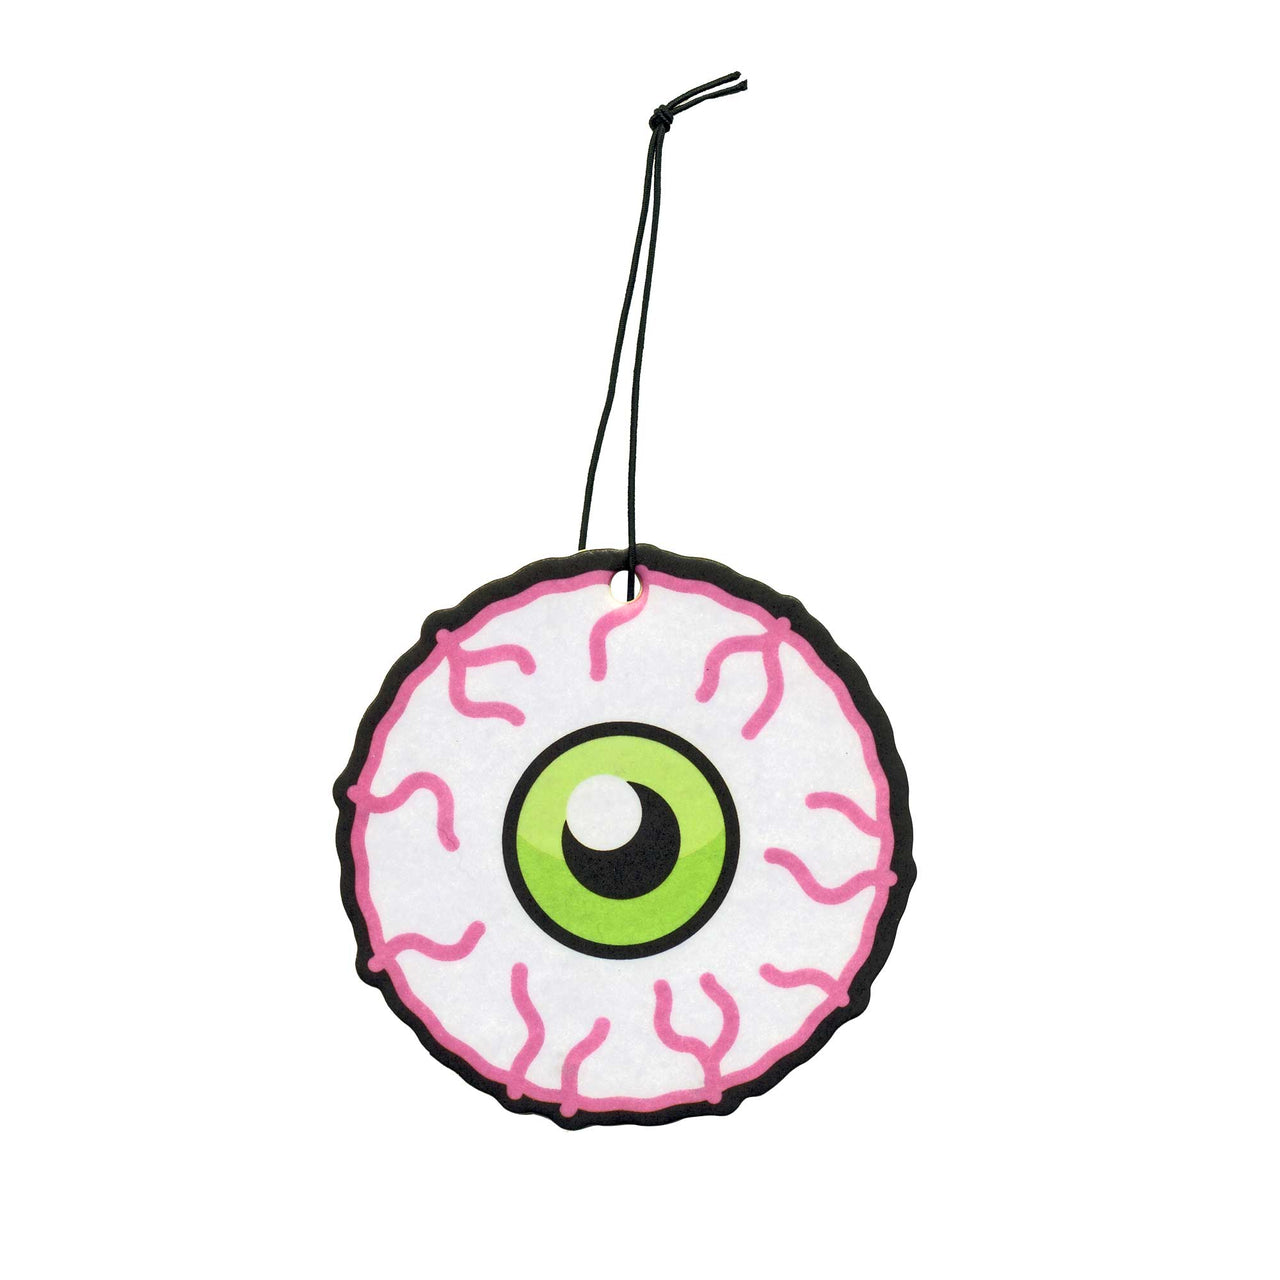 SOURPUSS JEEPERS PEEPERS AIR FRESHENER